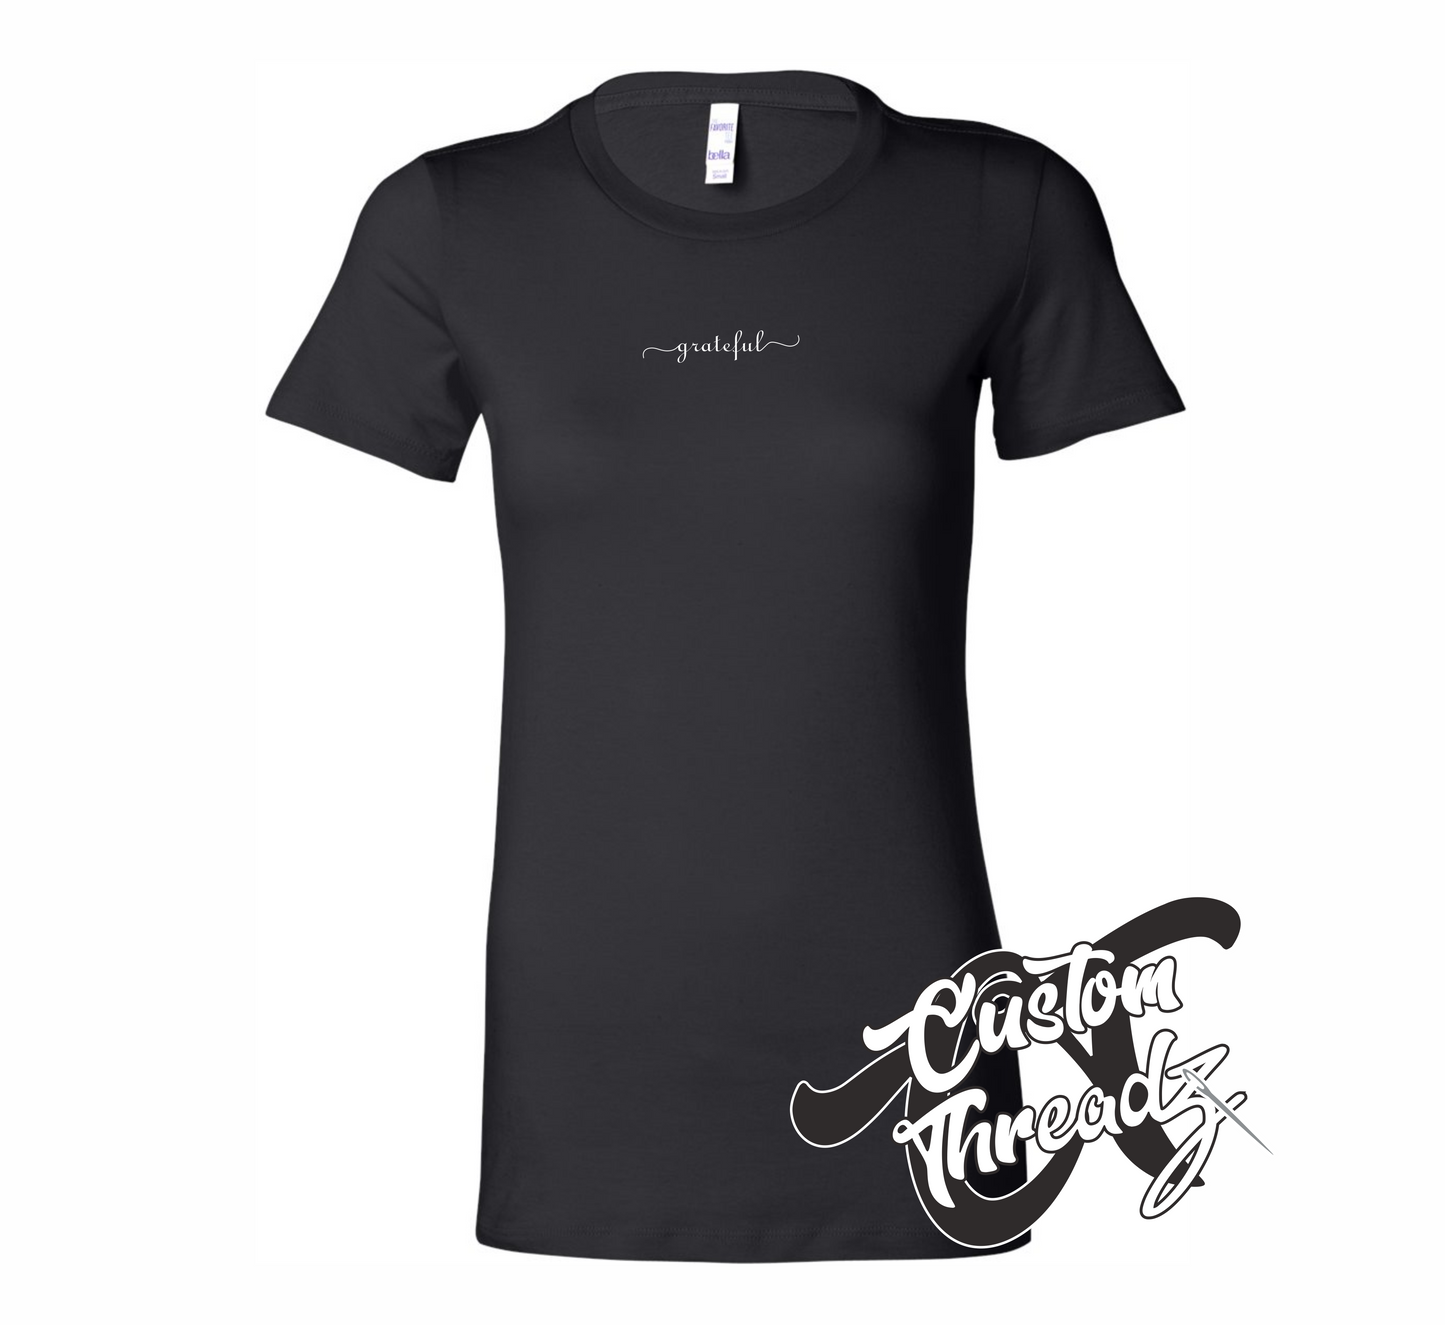 womens black tee with grateful script thanksgiving DTG printed design